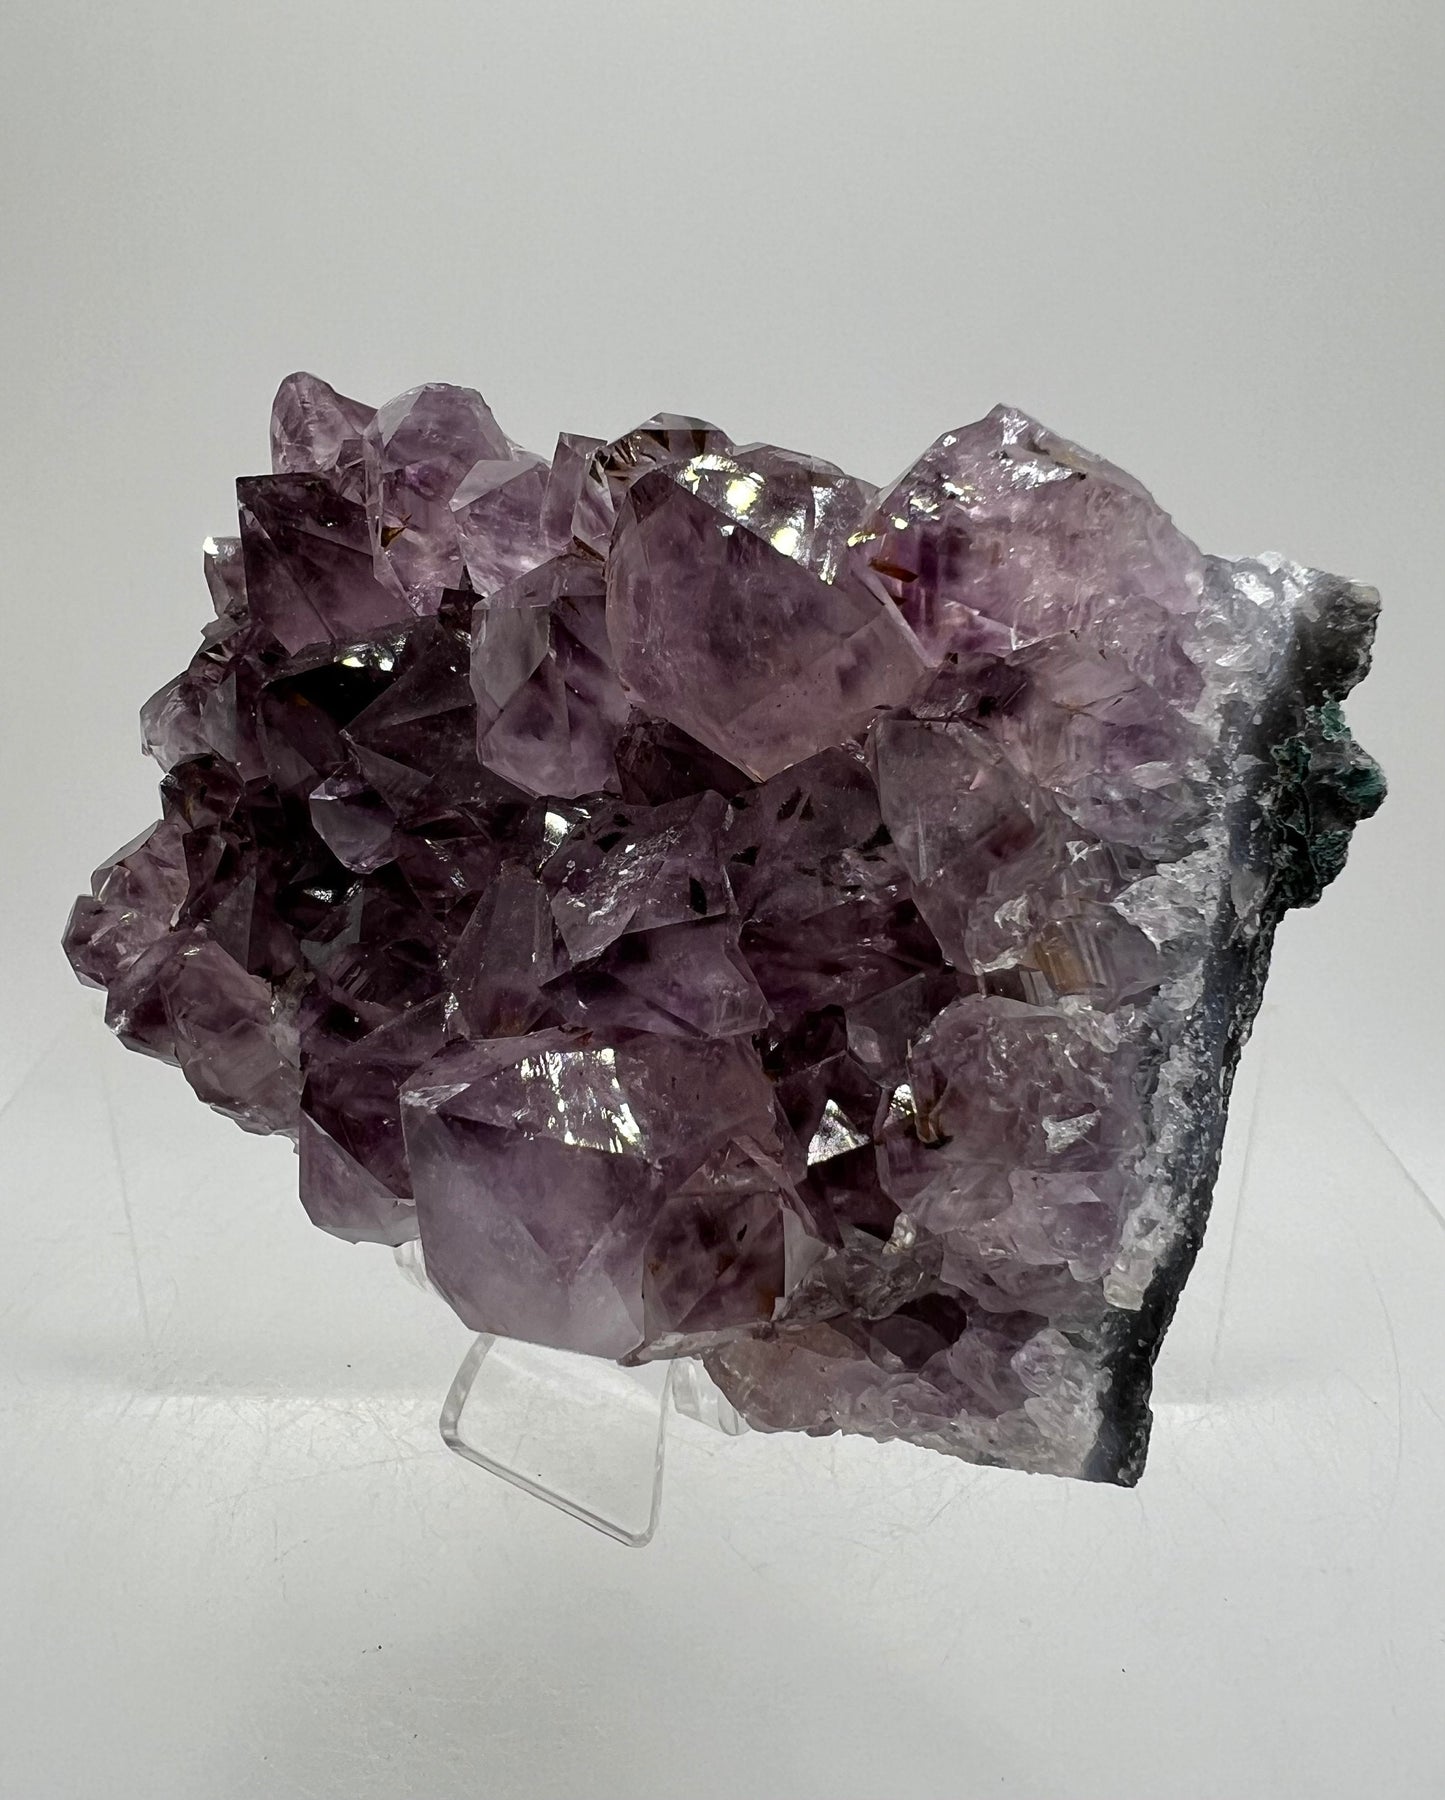 Very Rare Amethyst Cacoxenite. Stunning Purple Amethyst With Cacoxenite Inclusions. Beautiful Amethyst Display Cluster.